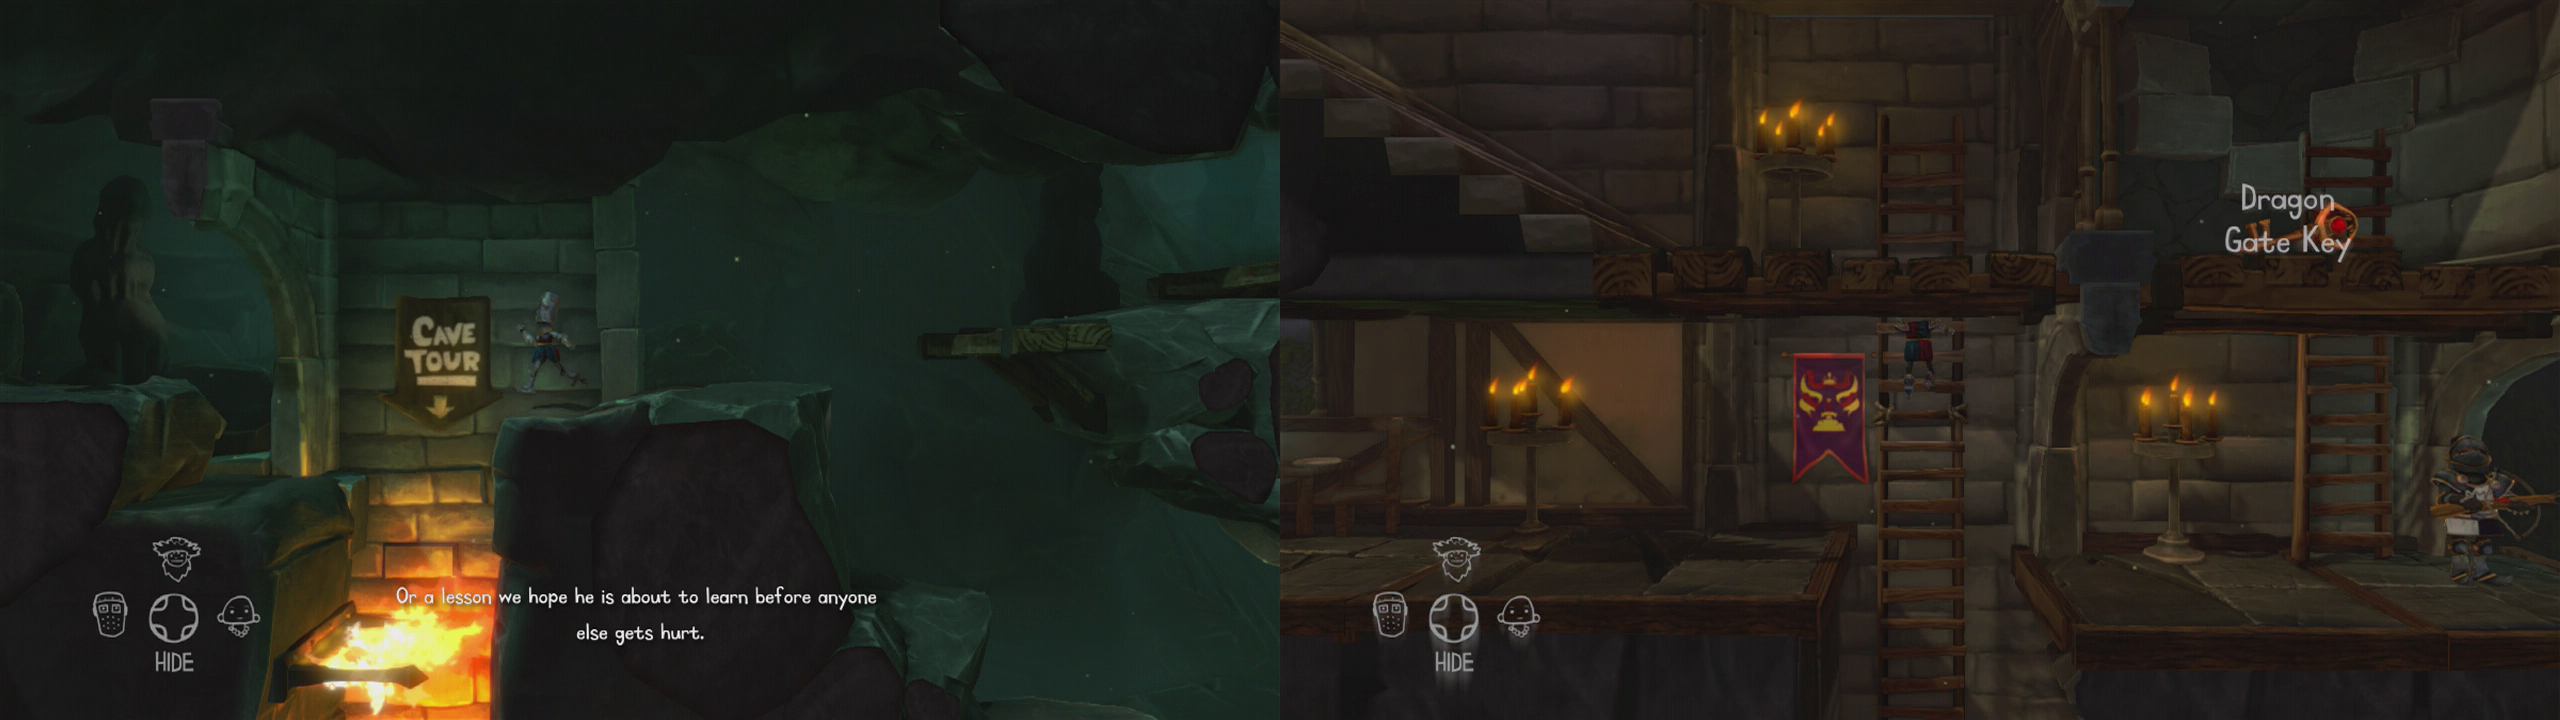 Drop down the flaming pit using the knight’s special ability (left). After speaking to the King and the Princess, continue into the tower (right).